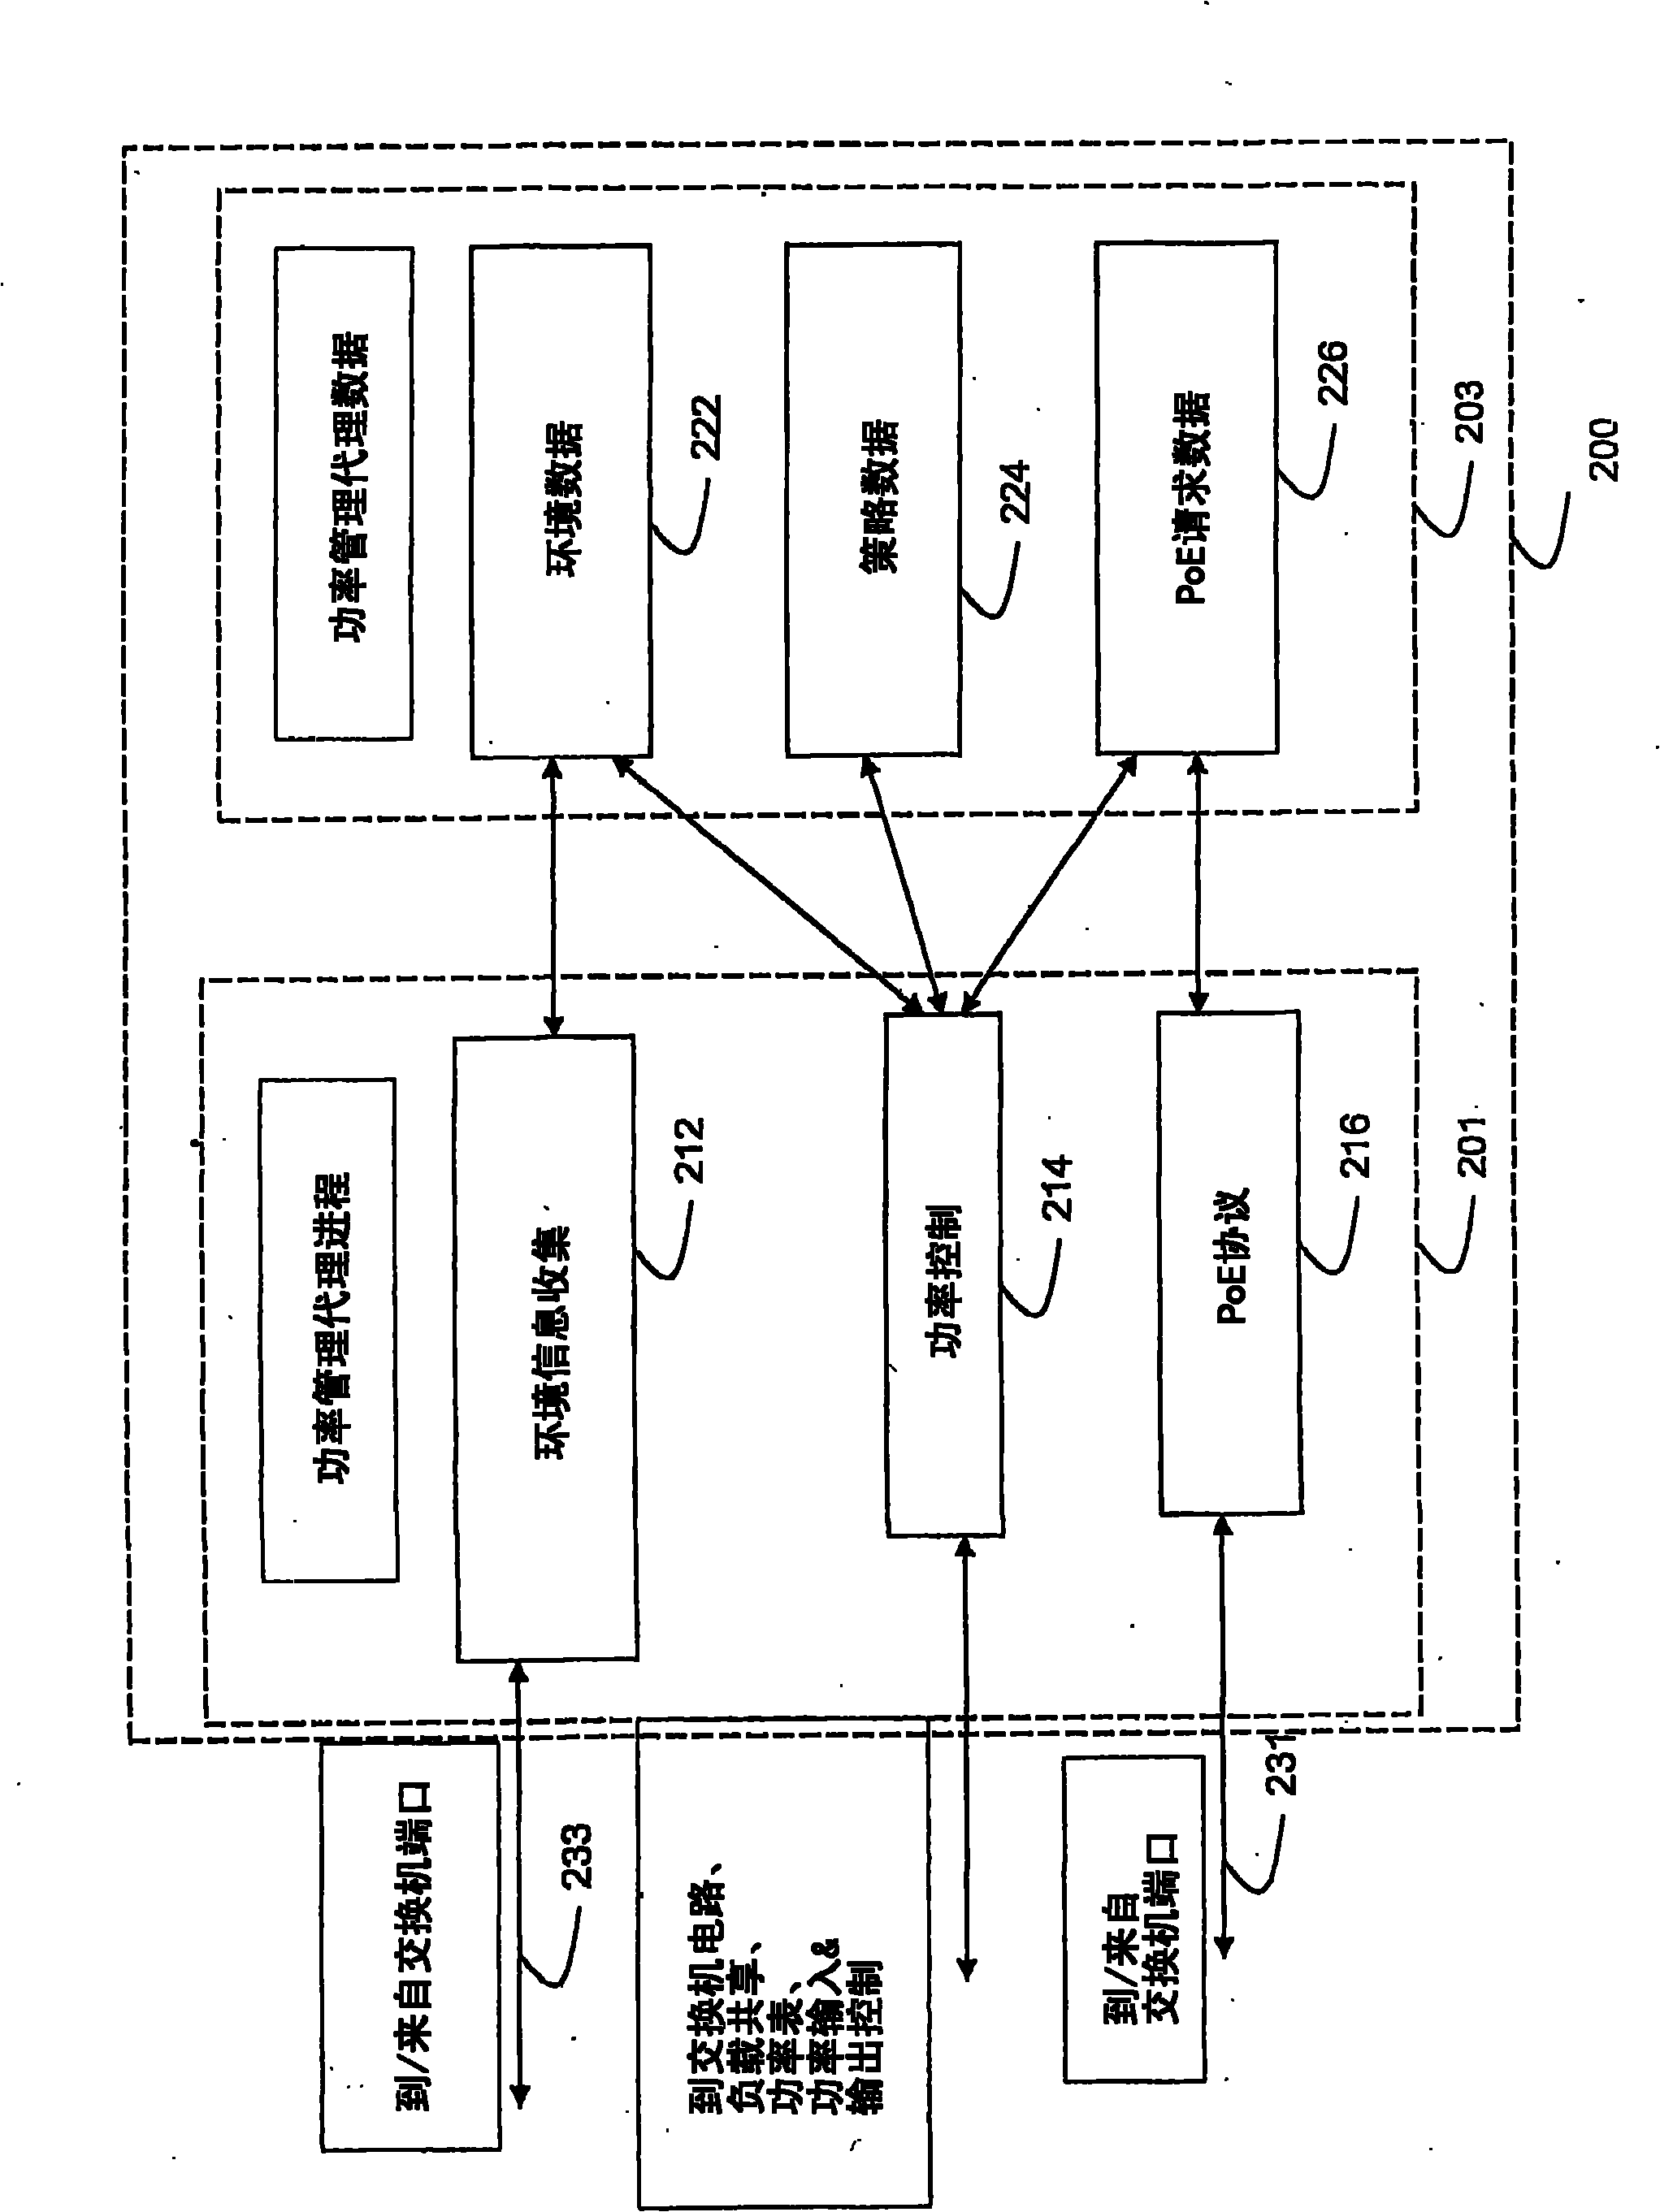 Intelligent power management of an intermediate network device switching circuitry and poe delivery